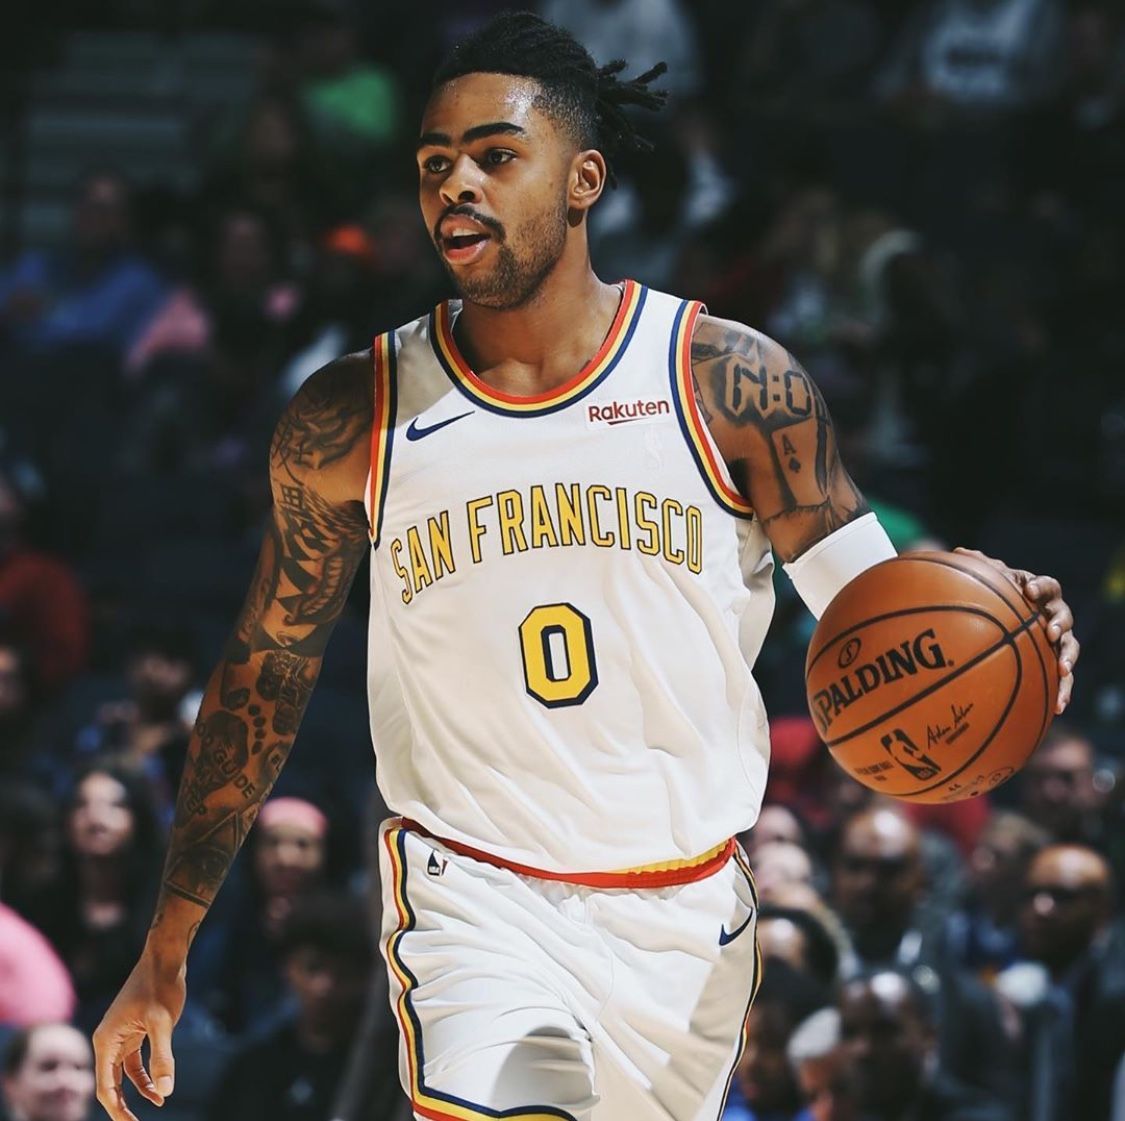 DLo. D'angelo Russell dropping career high 52. Nba picture, Basketball picture, Golden state warriors wallpaper